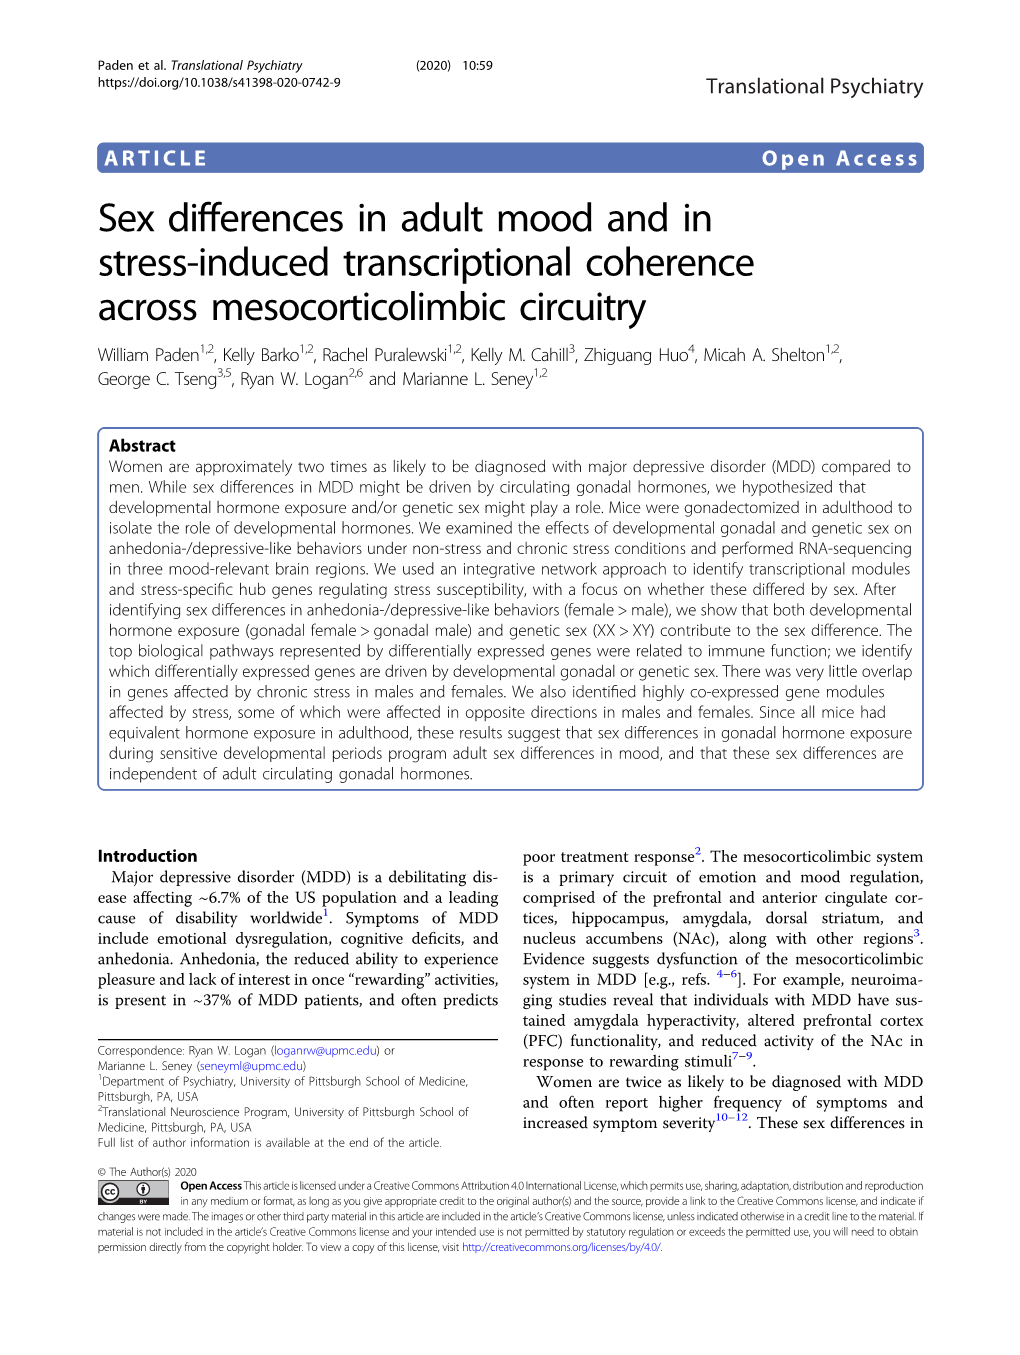 Sex Differences in Adult Mood and in Stress-Induced Transcriptional